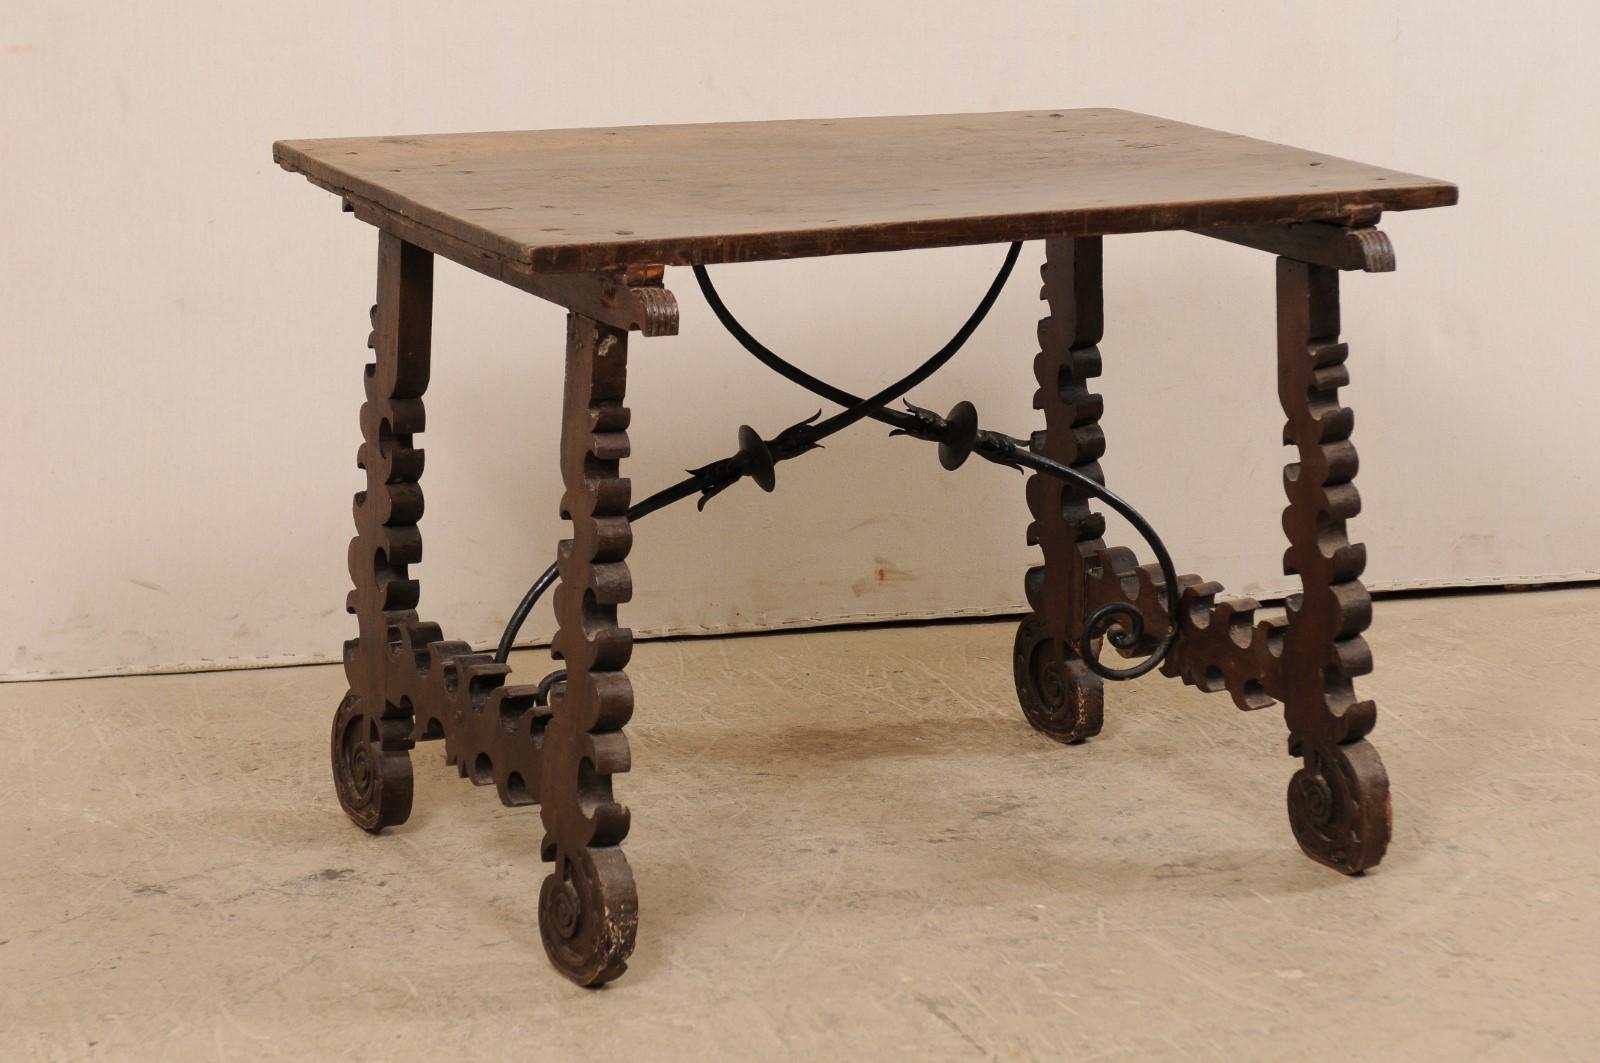 A Spanish baroque table with decorative forged-iron stretcher from the 18th century. This antique table from Spain features a rectangular-shaped top, which is raised upon a pair of fluidly-carved, lyre-shaped trestle styled legs at either end. The